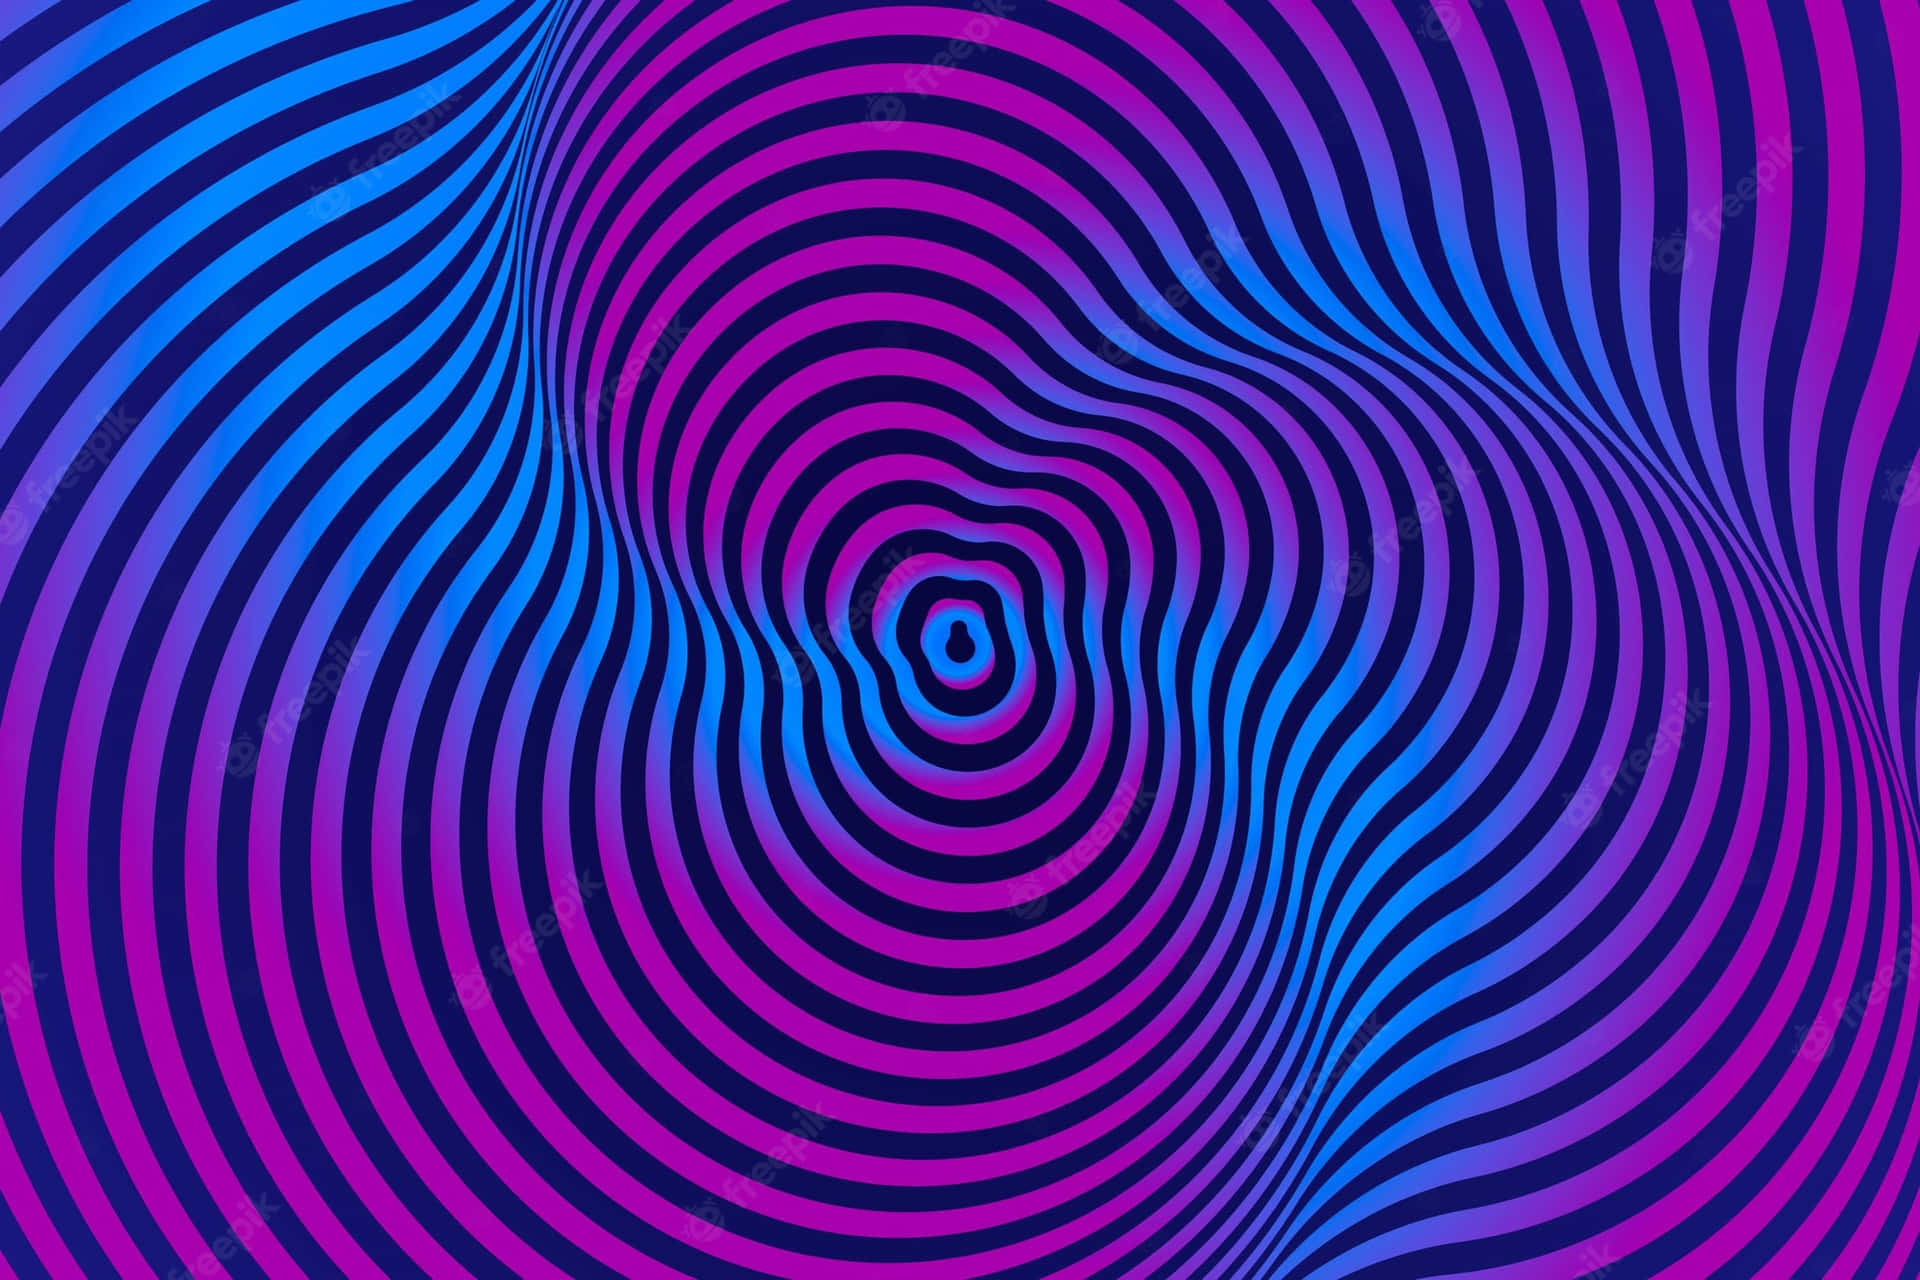 Looking Into the Psychedelic Colors Wallpaper